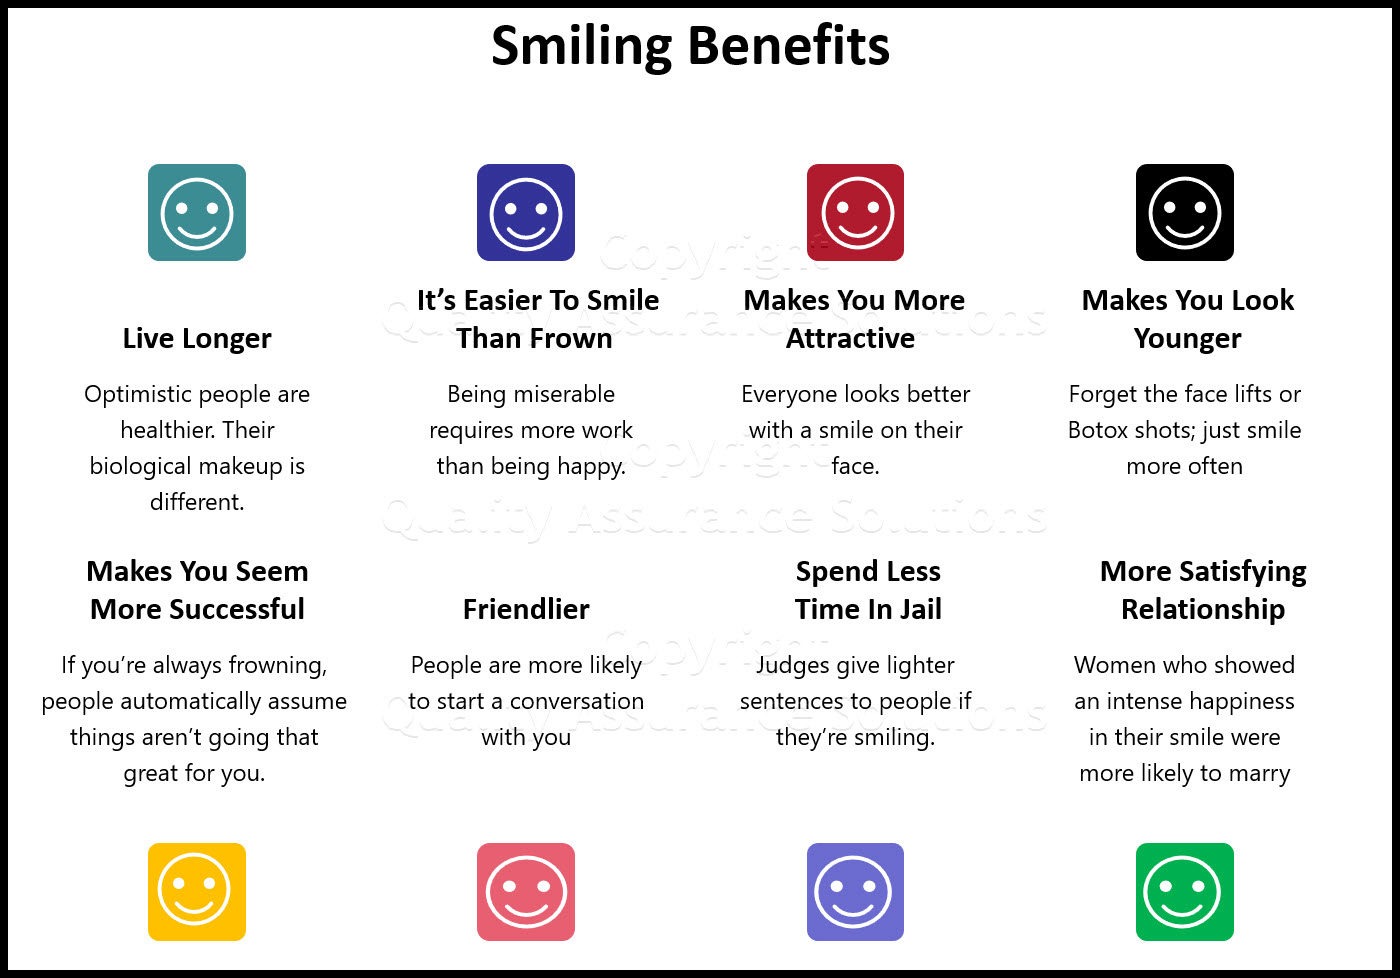 Eight benefits to smile greetings that improves you!